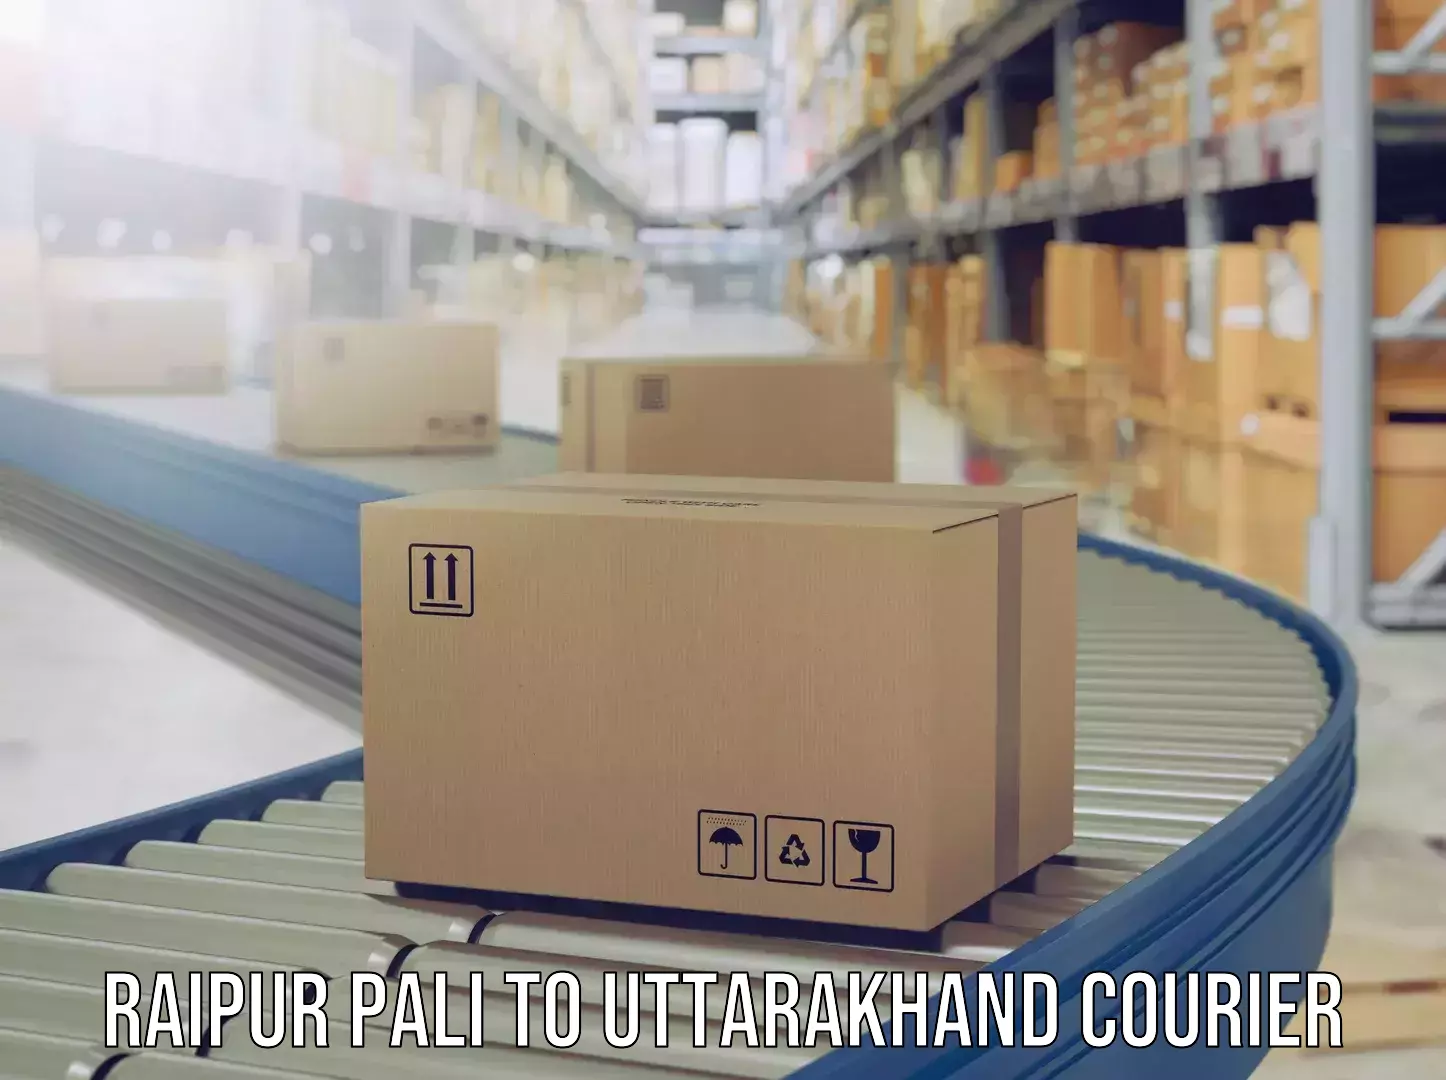 Personalized luggage shipping in Raipur Pali to Almora